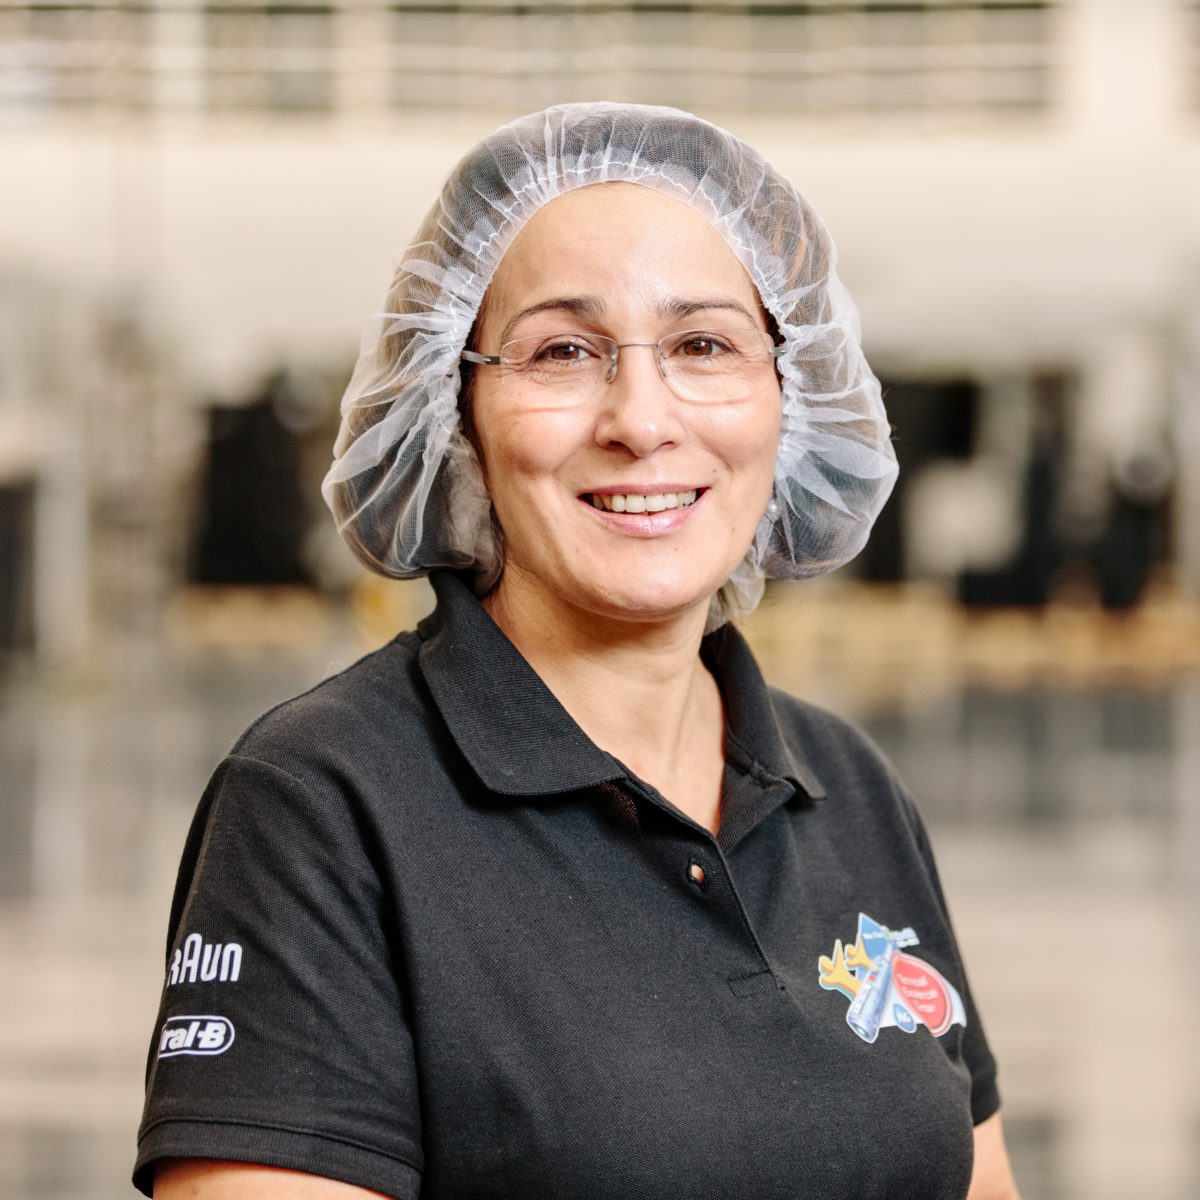 Employee of the company Procter & Gamble GmbH in Marktheidenfeld with hair protection